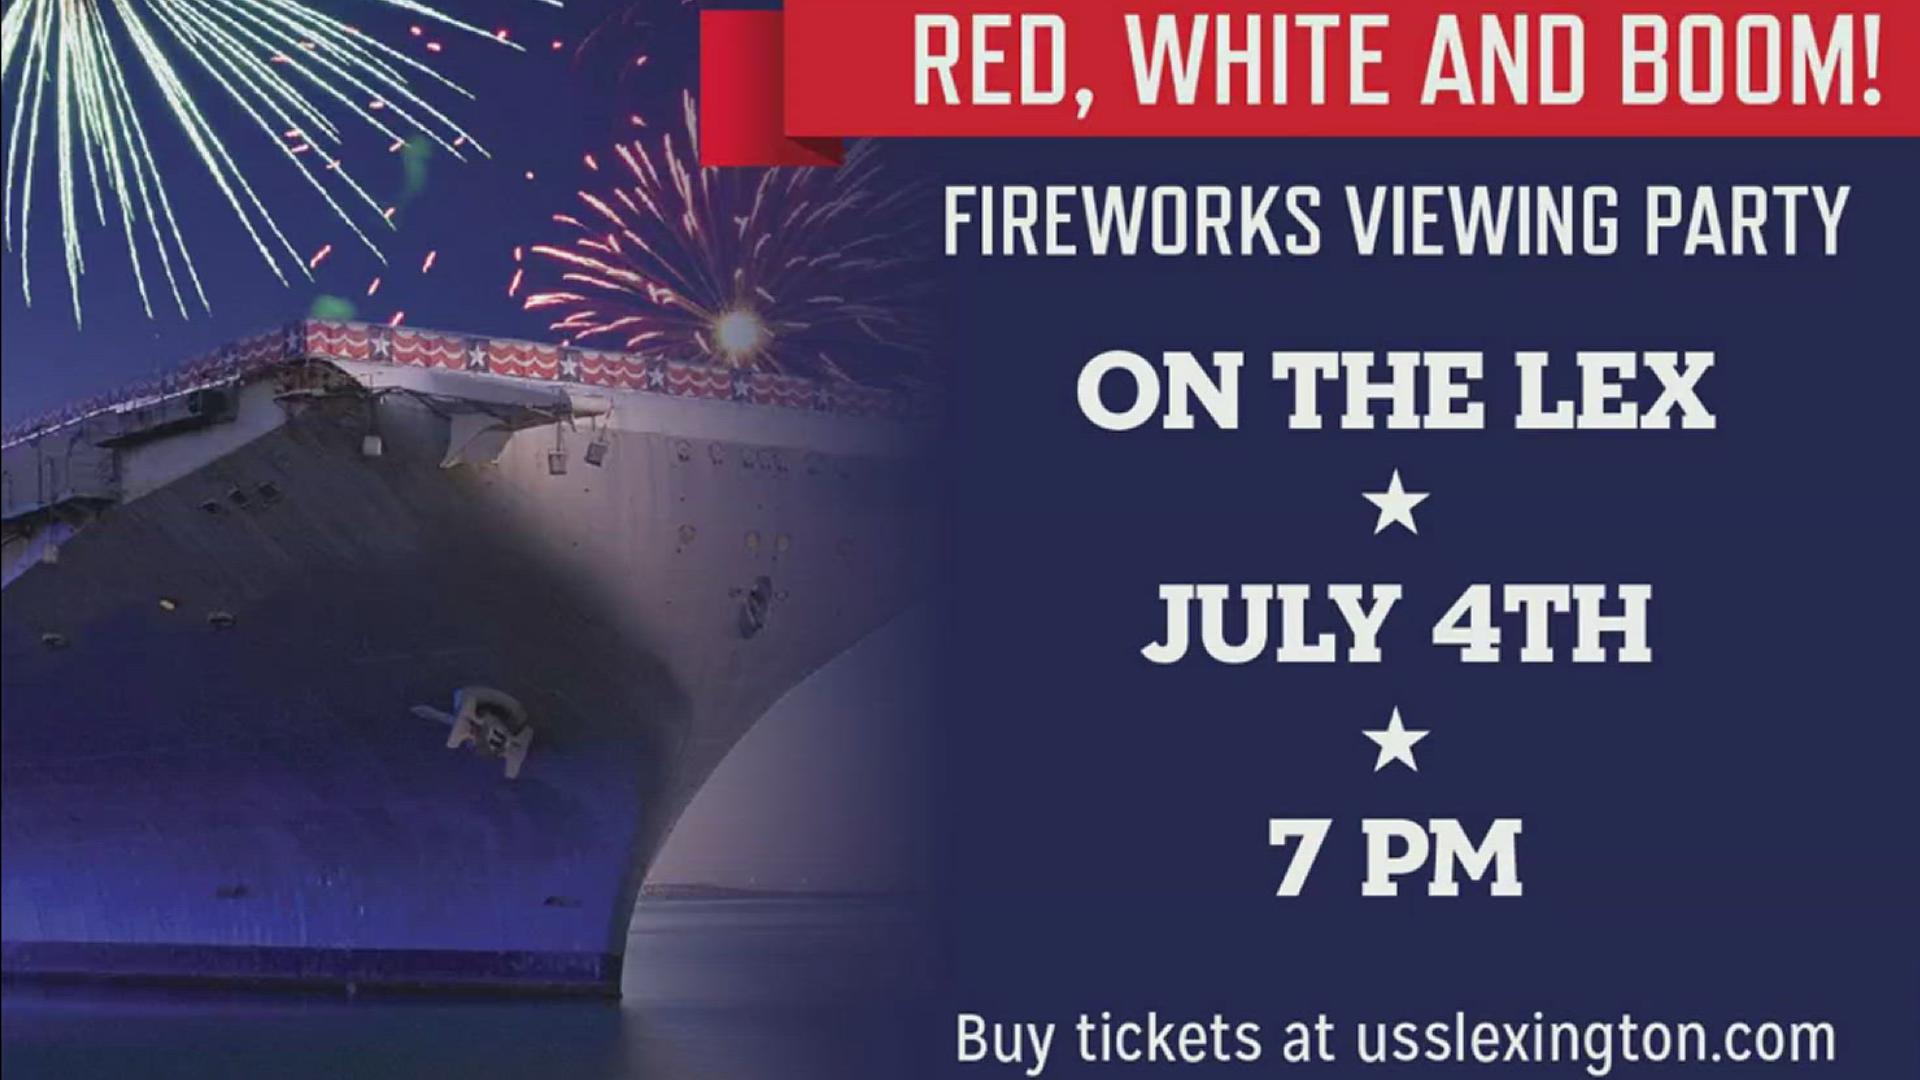 Looking for some plans for Fourth of July? We've got you covered!